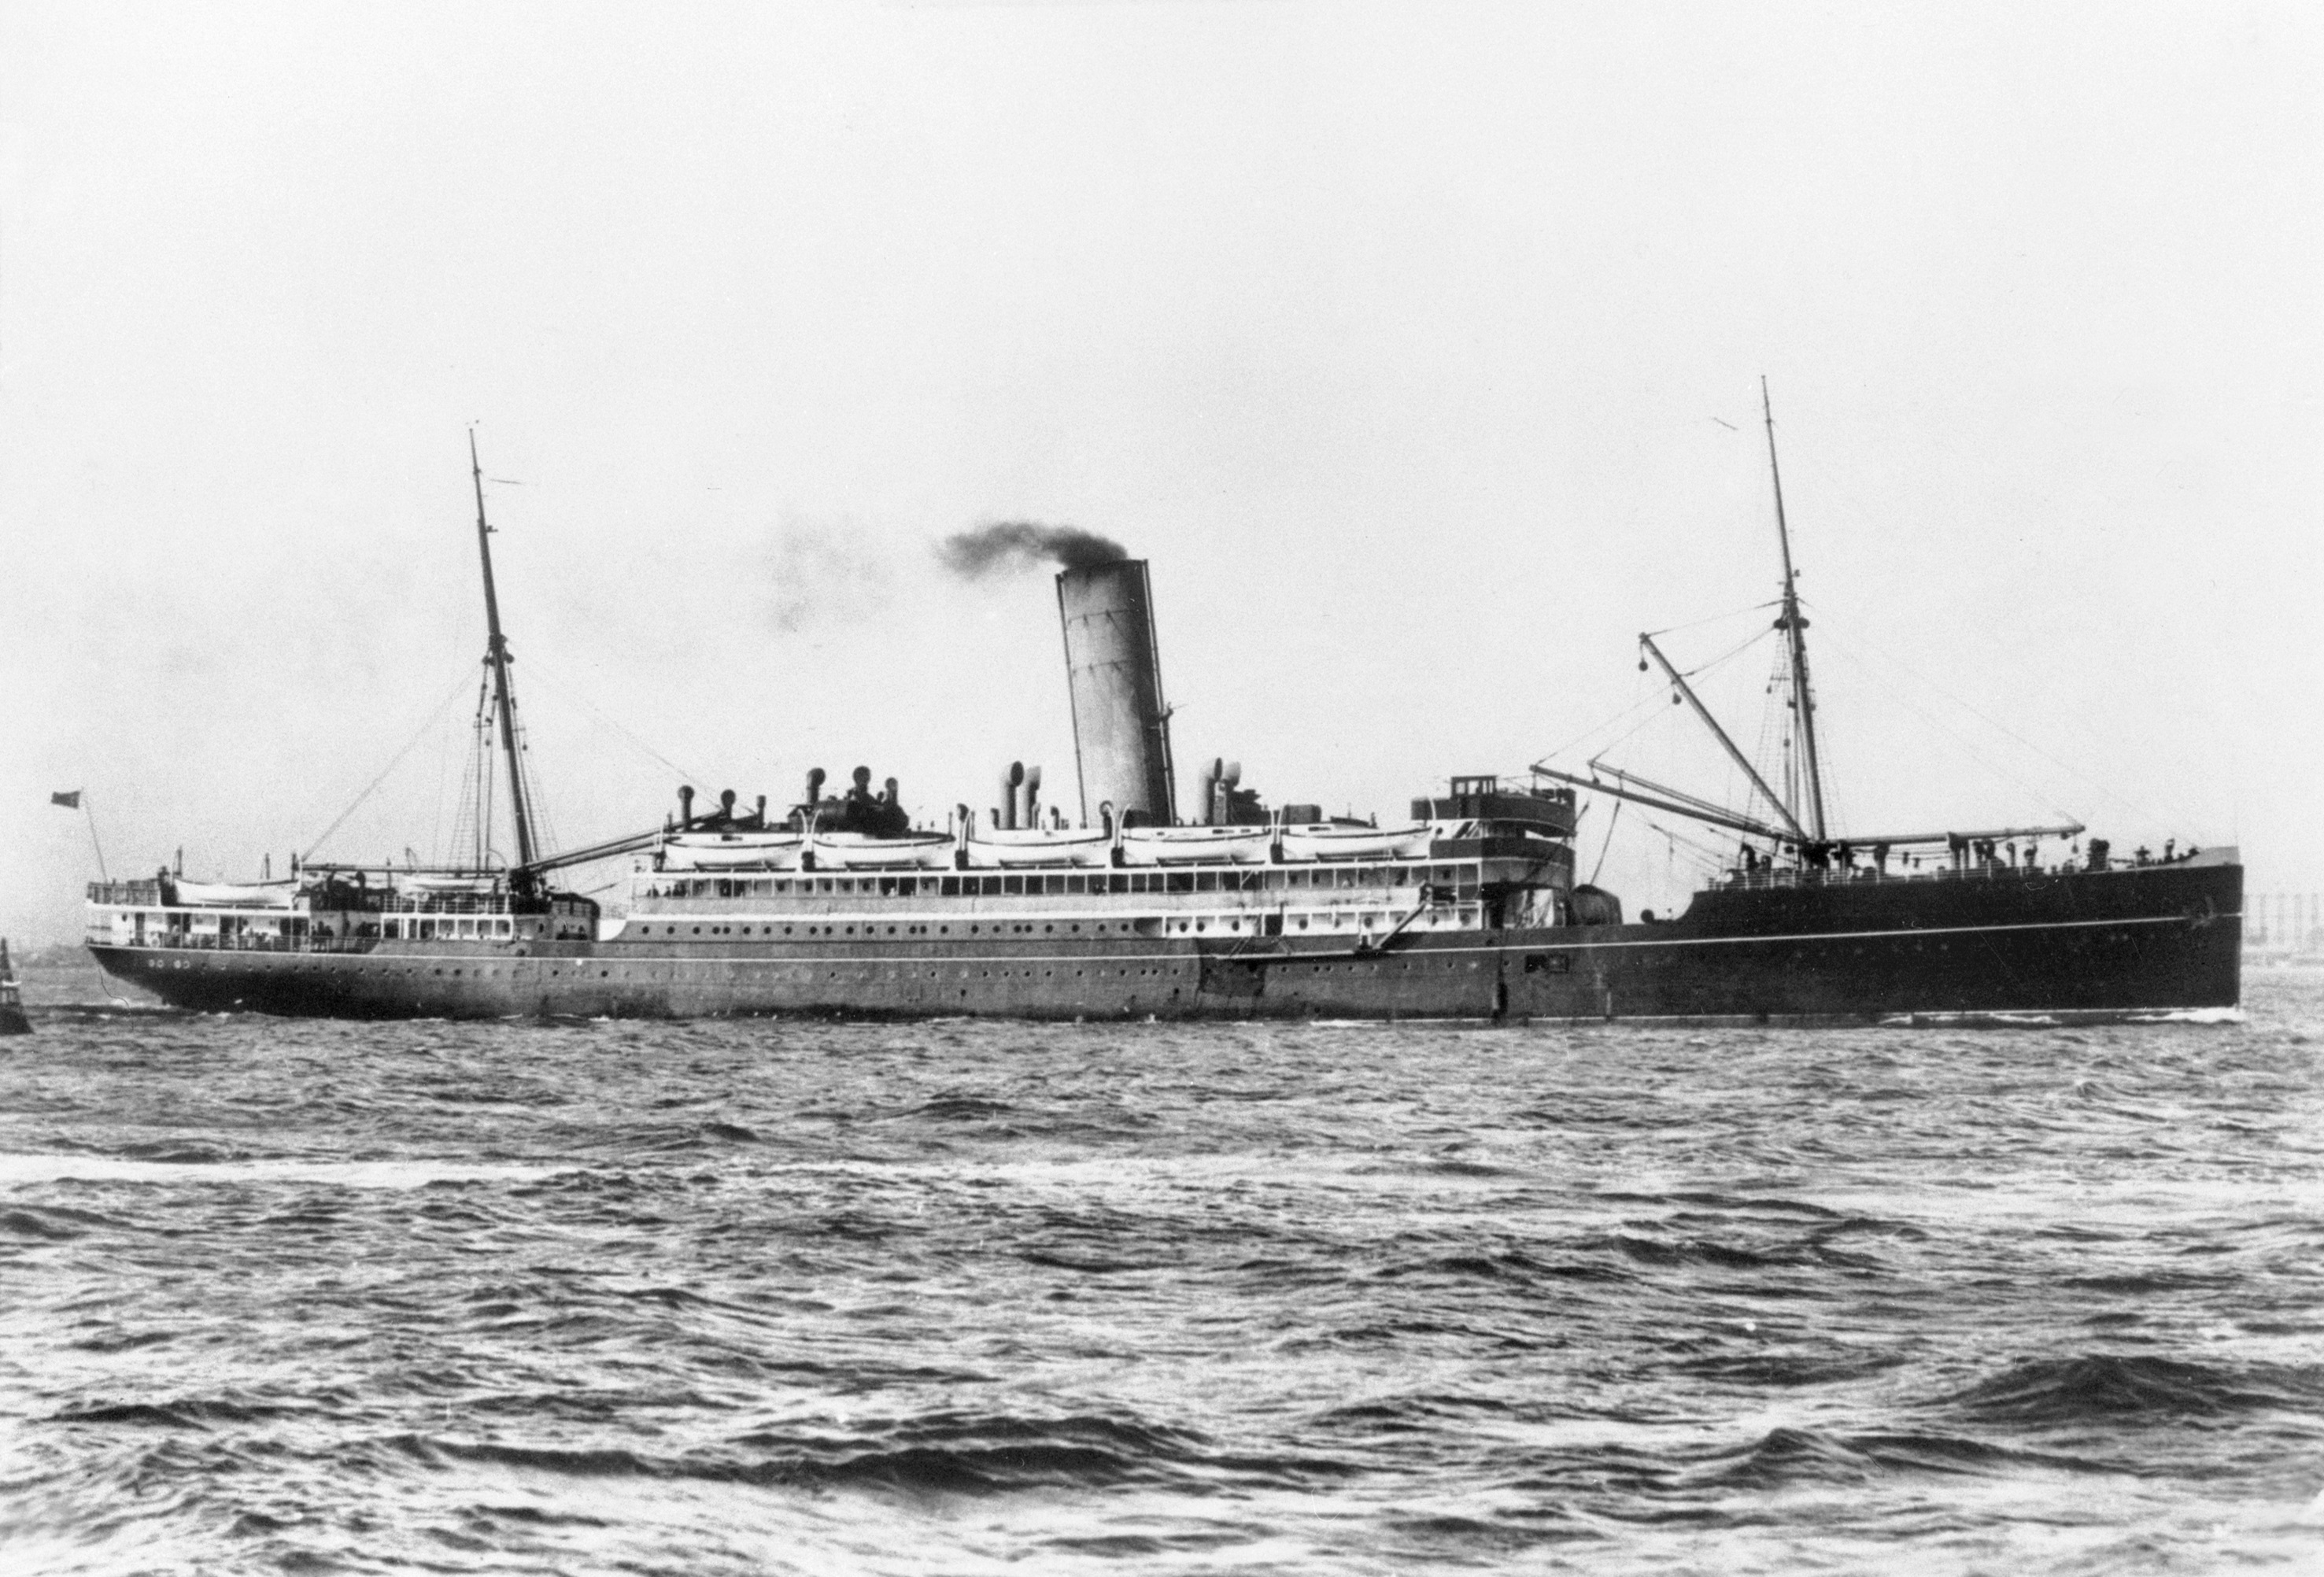 Starboard side view of the cargo and passenger vessel SS Zealandia